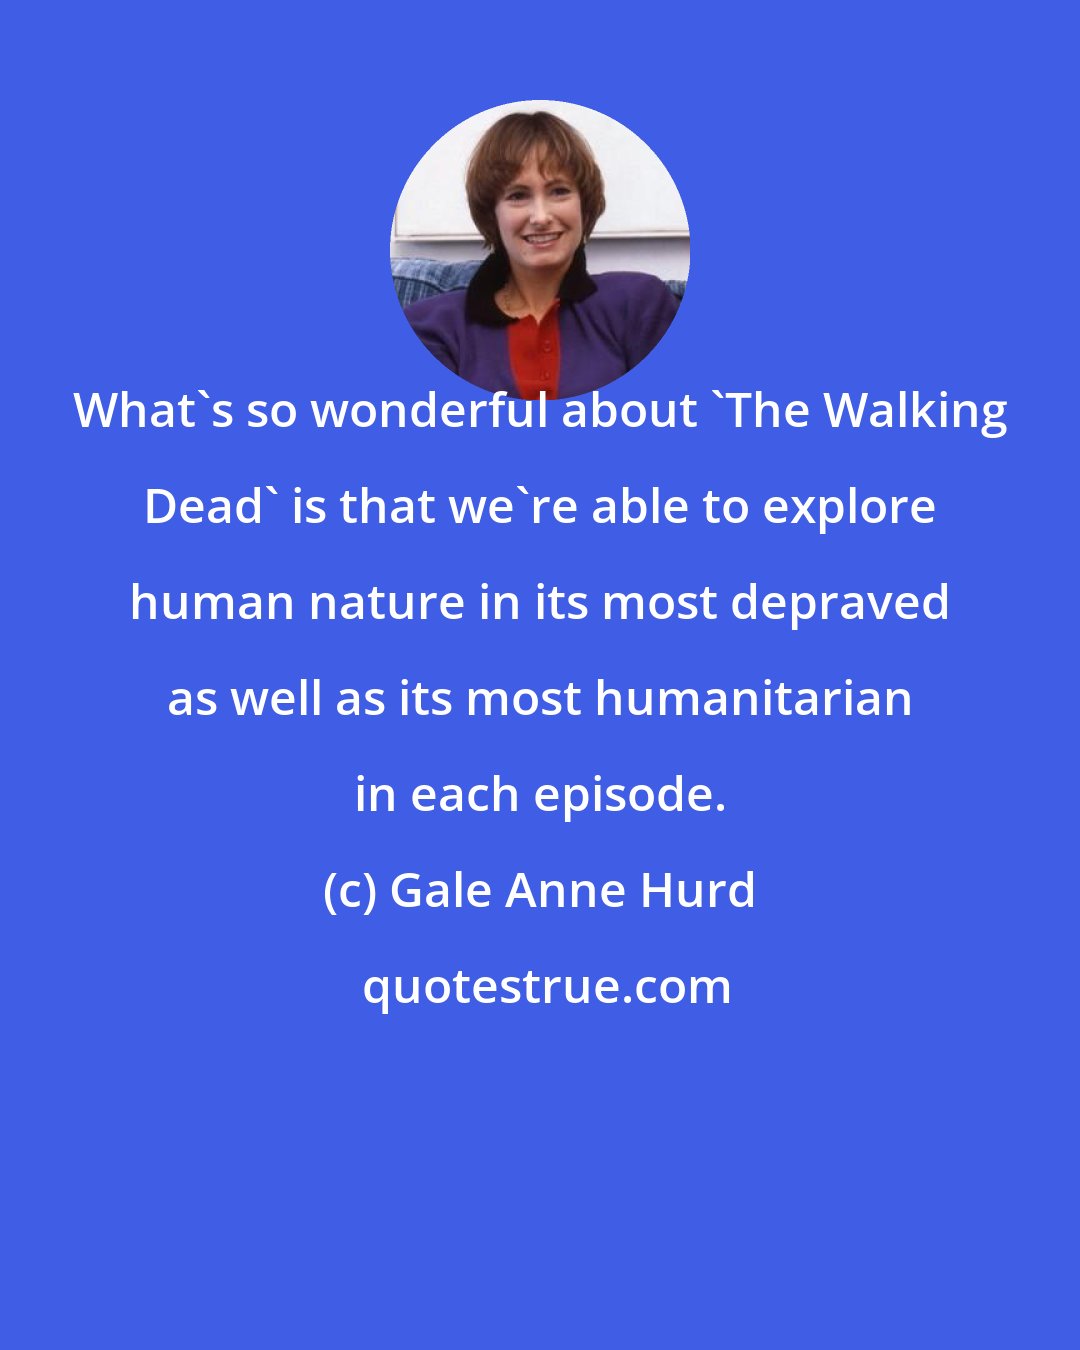 Gale Anne Hurd: What's so wonderful about 'The Walking Dead' is that we're able to explore human nature in its most depraved as well as its most humanitarian in each episode.